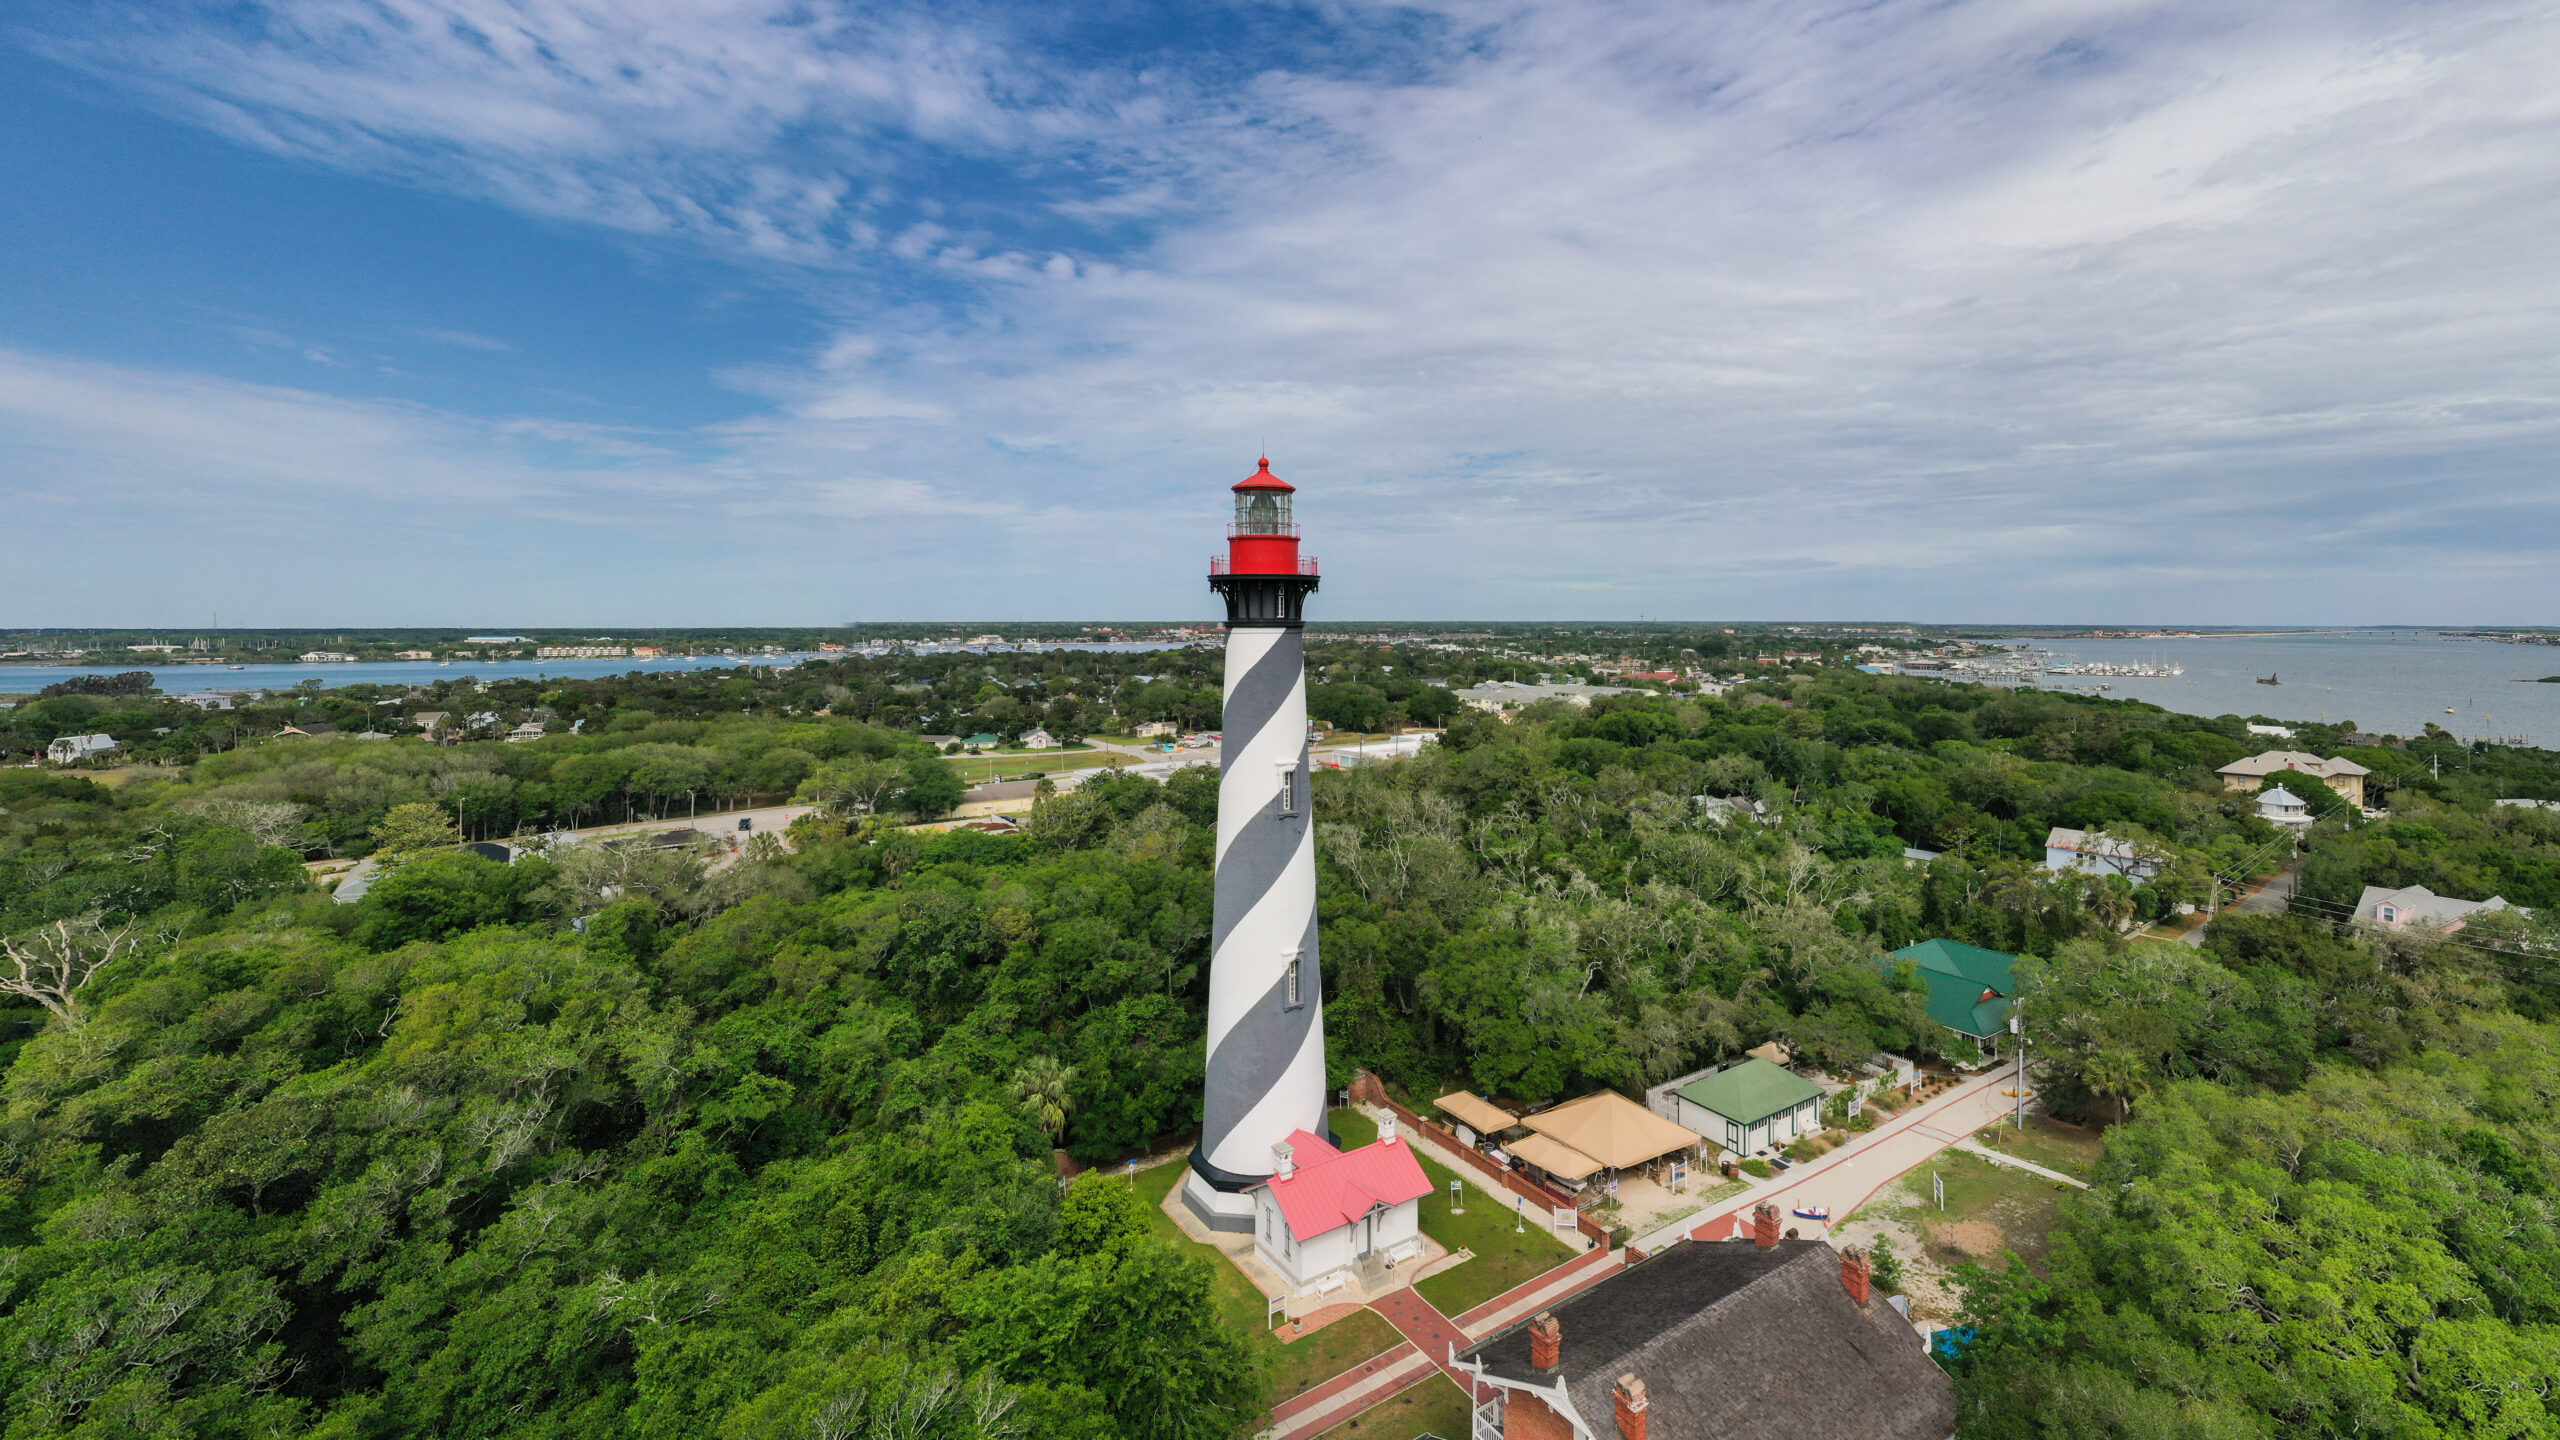 Lighthouse in Saint Augustine, FL as featured in great day trips from Orlando.